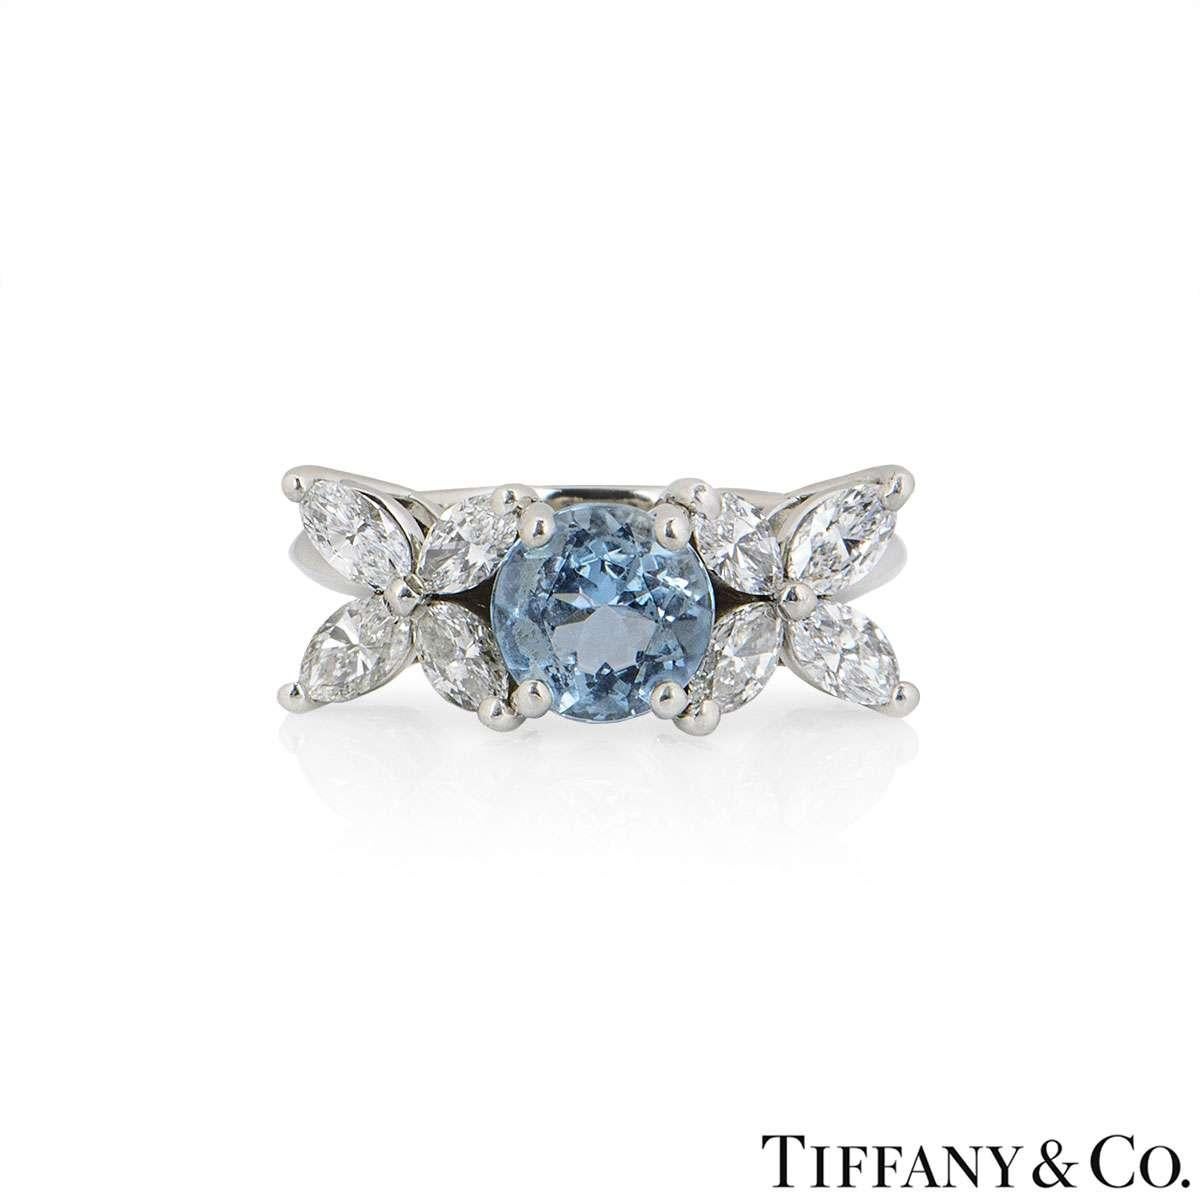 A diamond and aquamarine ring in platinum from the Victoria collection by Tiffany & Co. The ring is set to the centre with a round cut aquamarine weighing approximately 1.00ct. The stone is flanked by 4 marquise cut diamonds on either side, with a